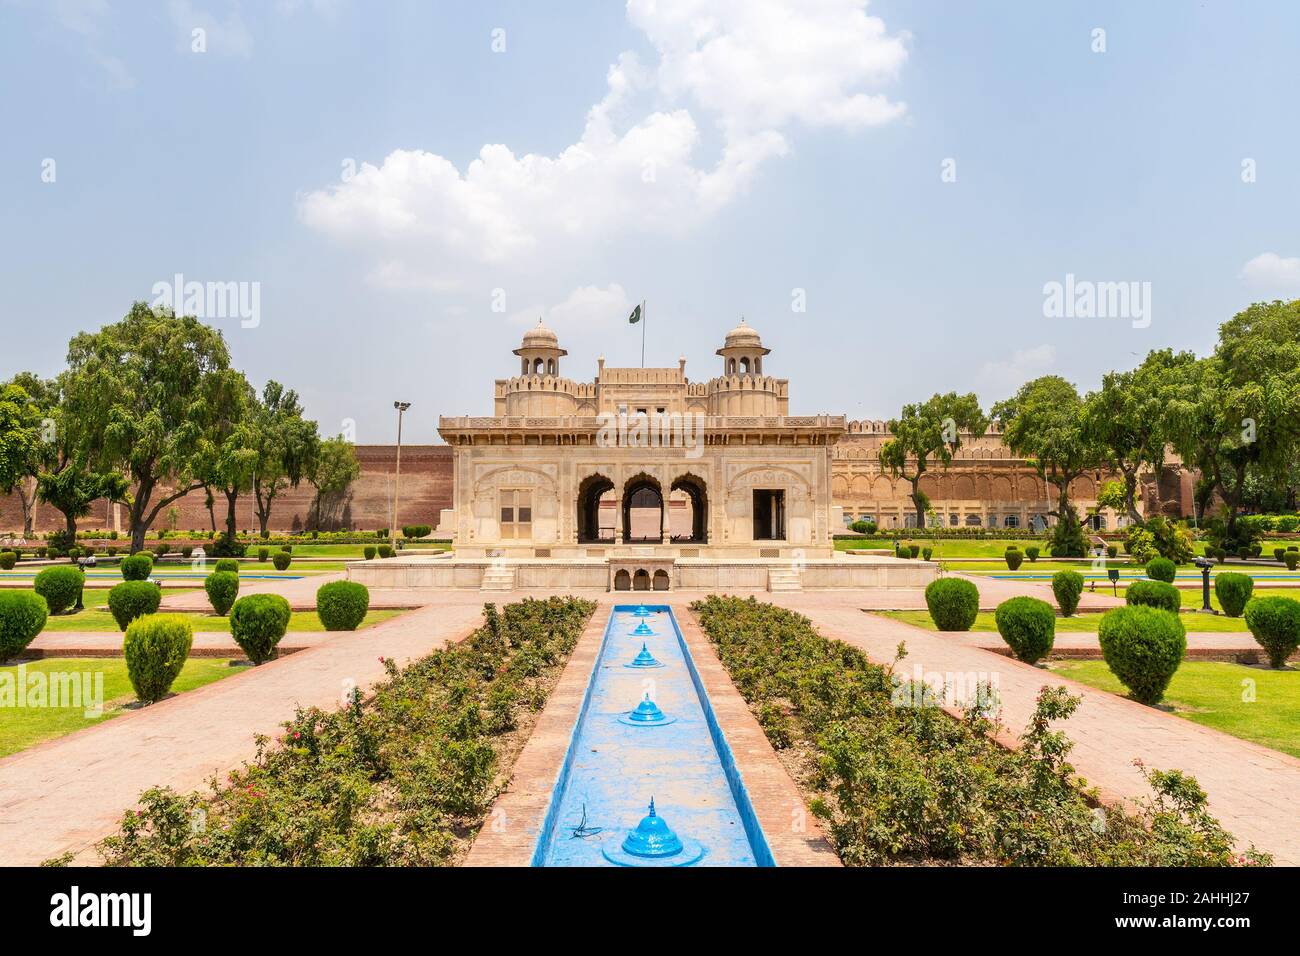 Lahore Fort Picturesque Breathtaking View of Hazuri Bagh Park and Alamgiri Gate with Waving Pakistan Flag on a Sunny Blue Sky Day Stock Photo